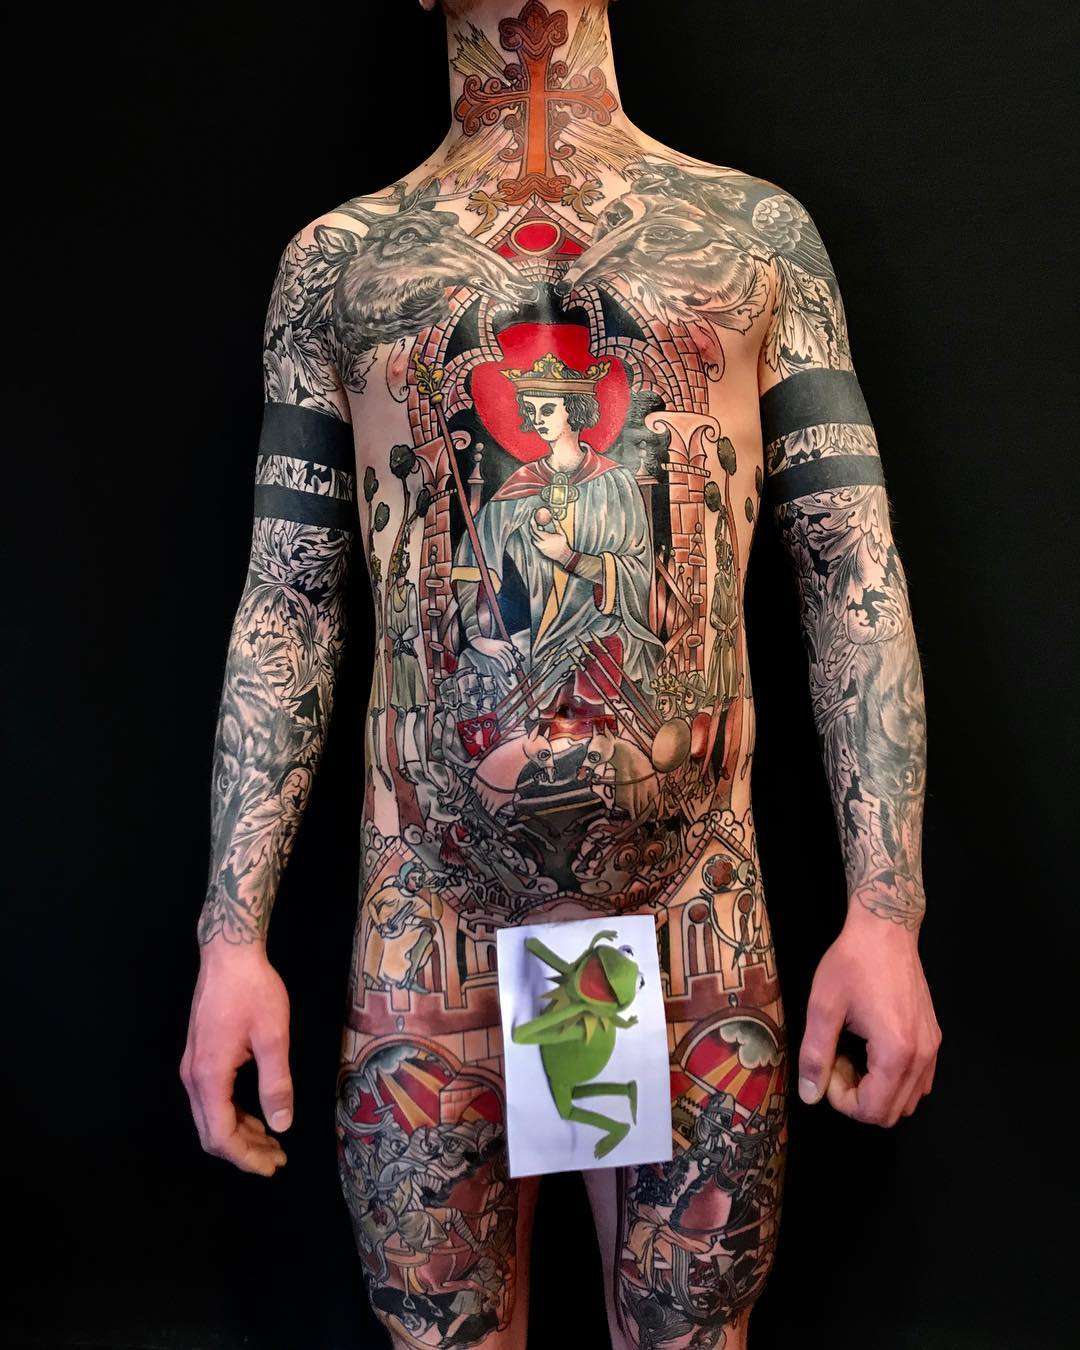 Medieval's spirit in tattoos by Mikael de Poissy